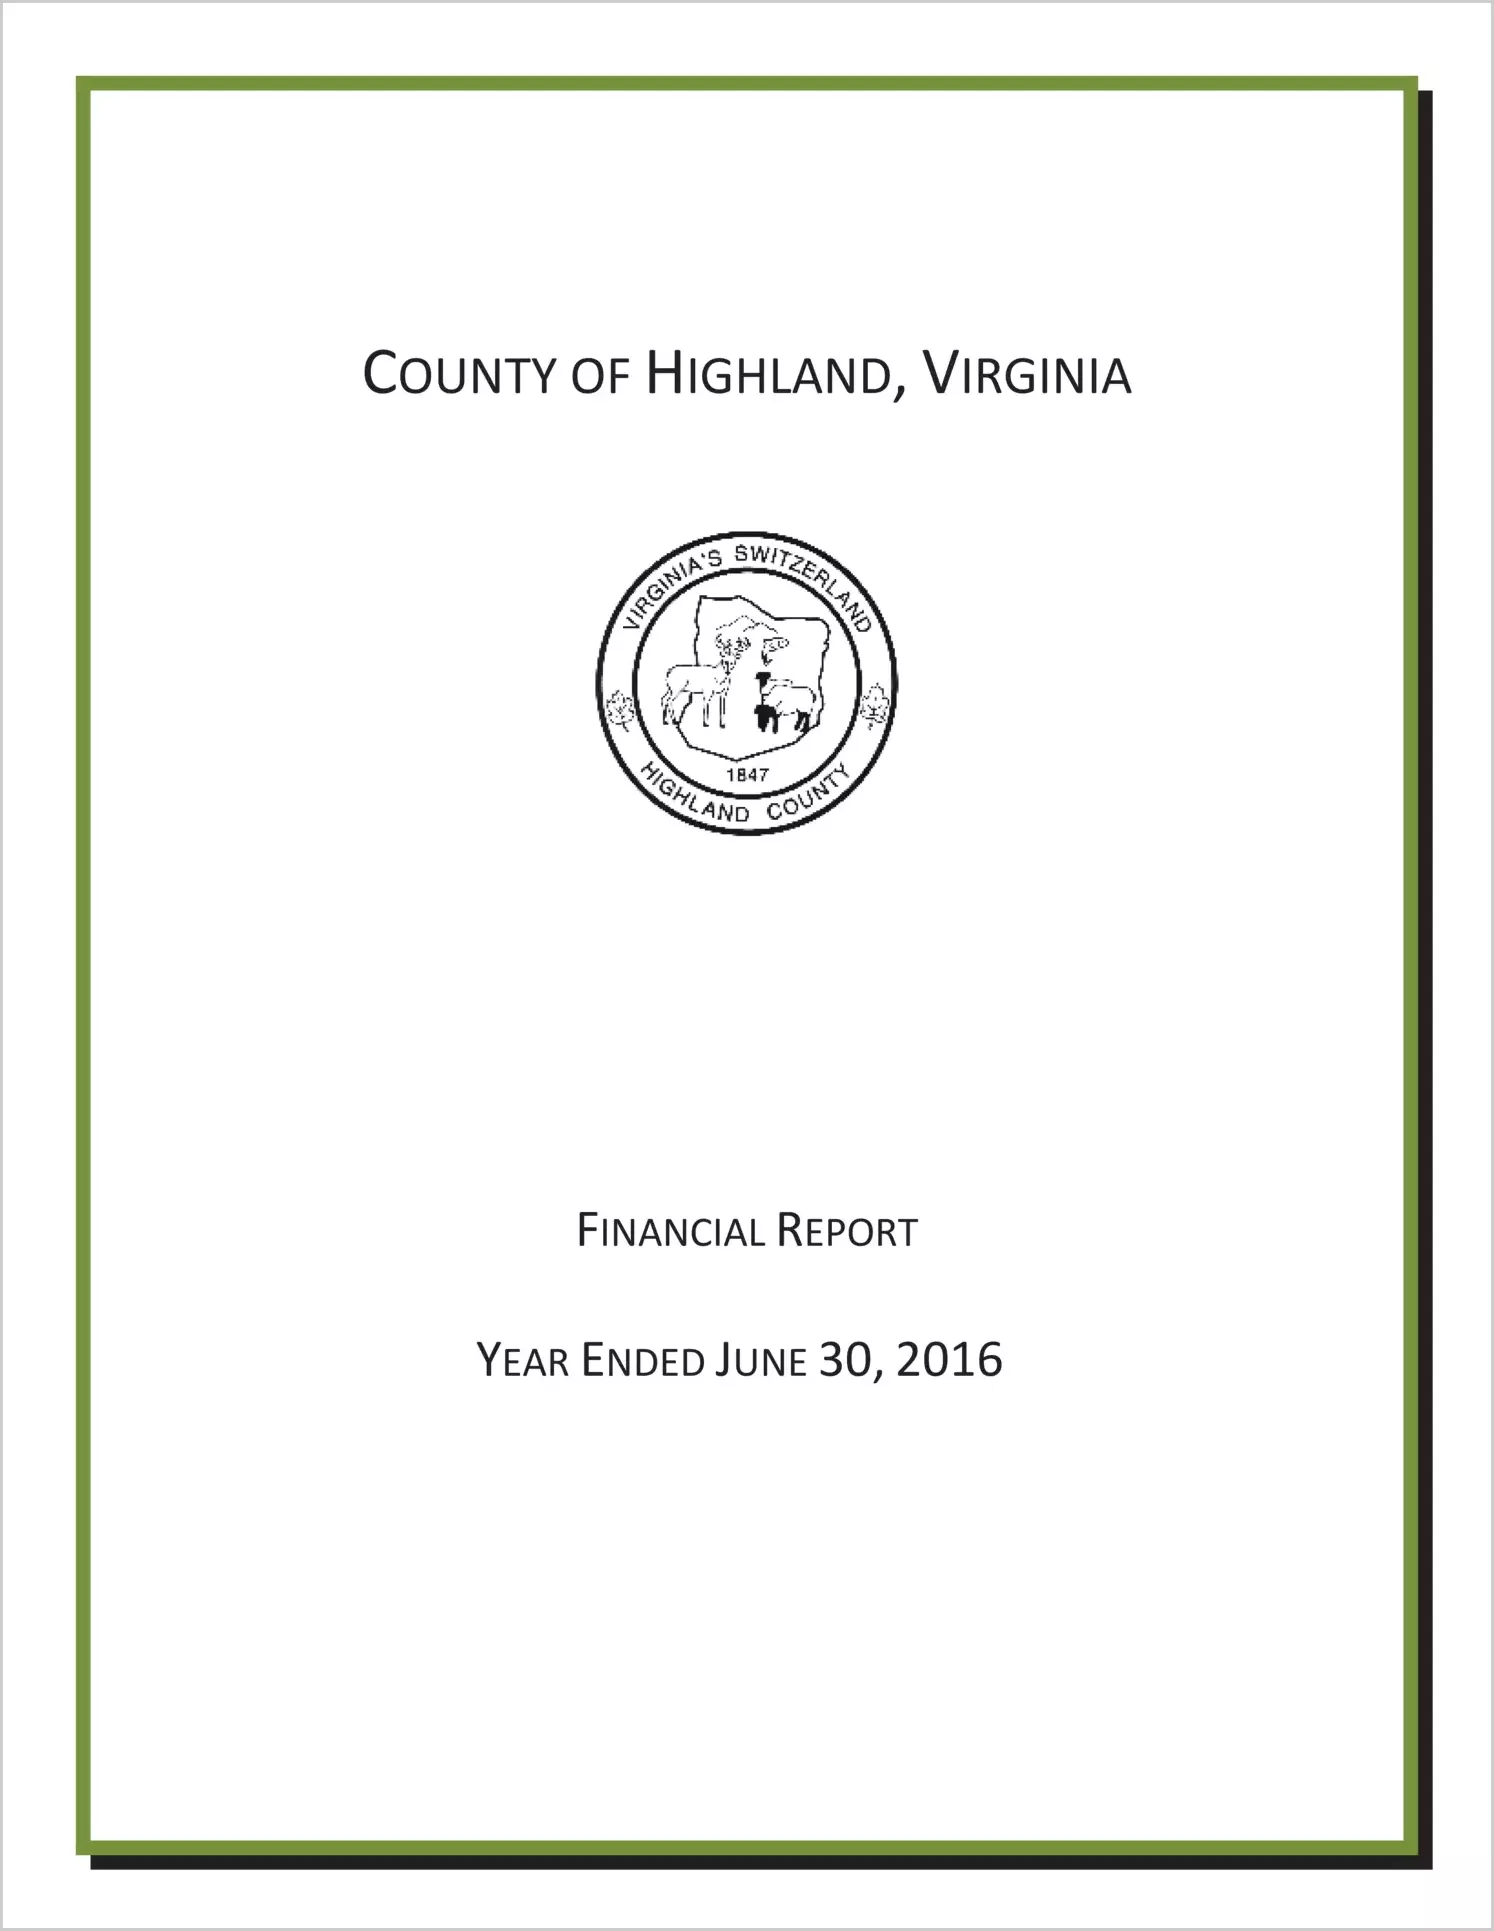 2016 Annual Financial Report for County of Highland